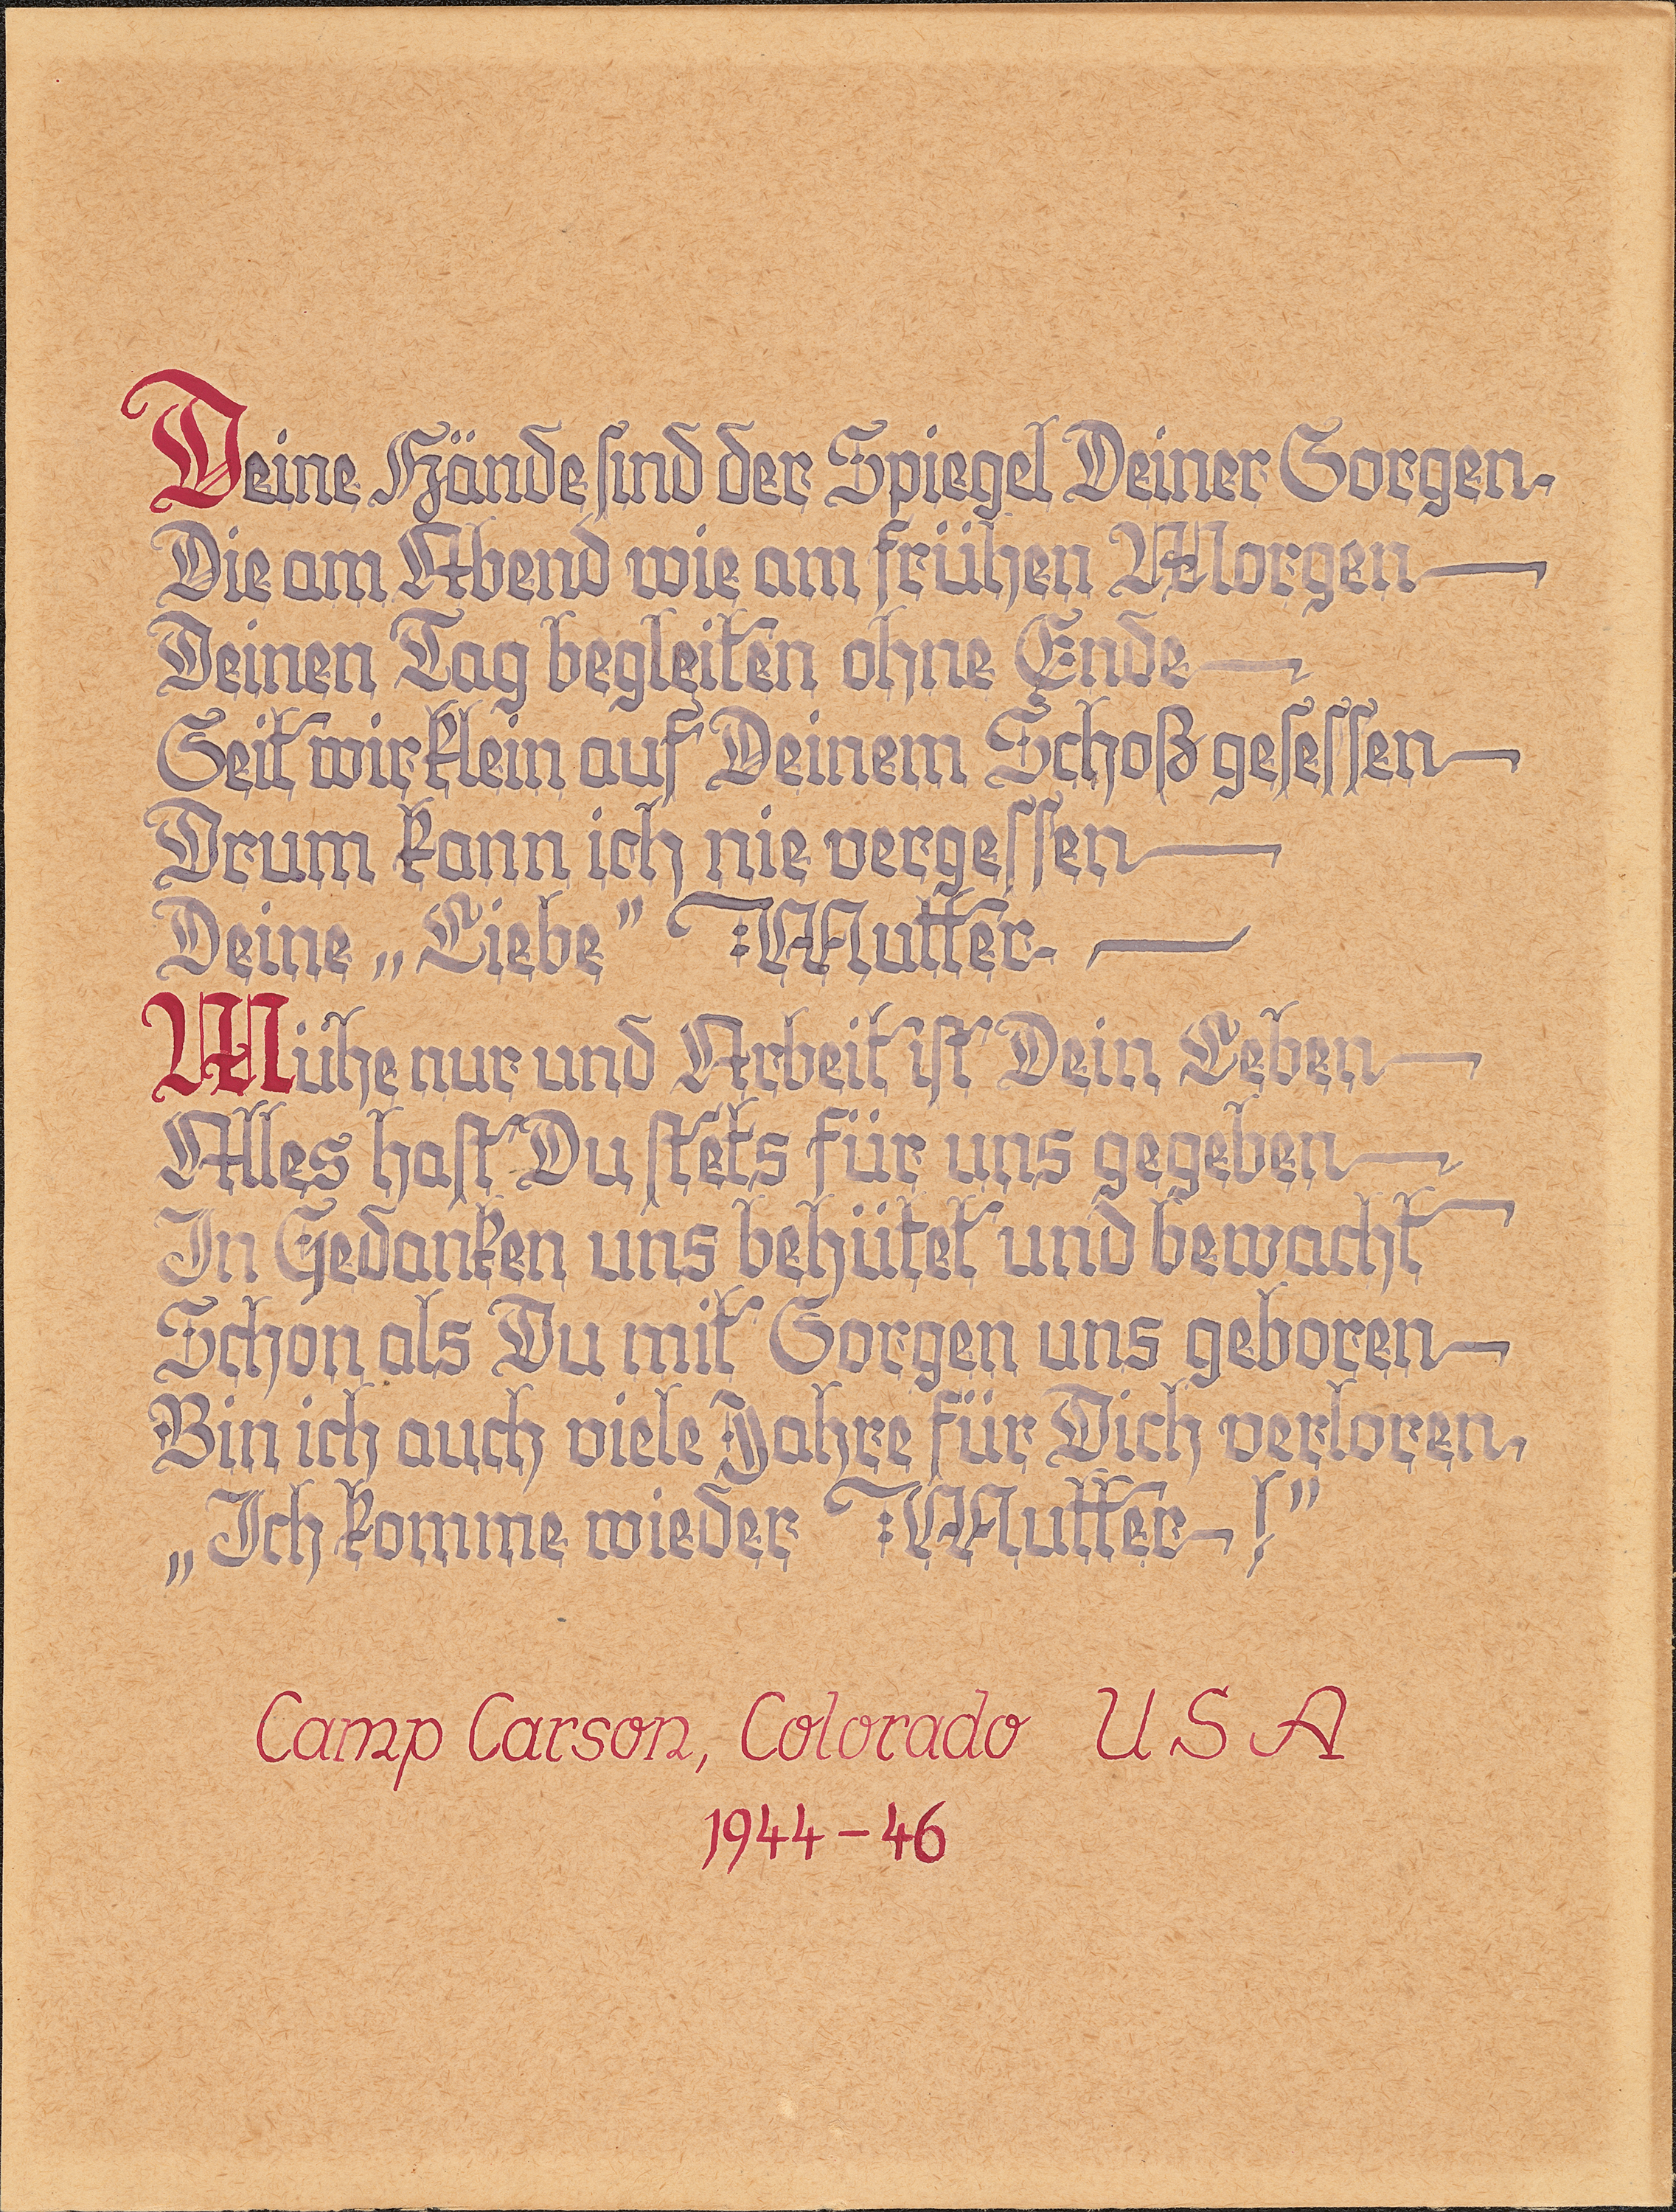 A framed German poem created by POW Jakob Biehl during his time at Camp Carson.